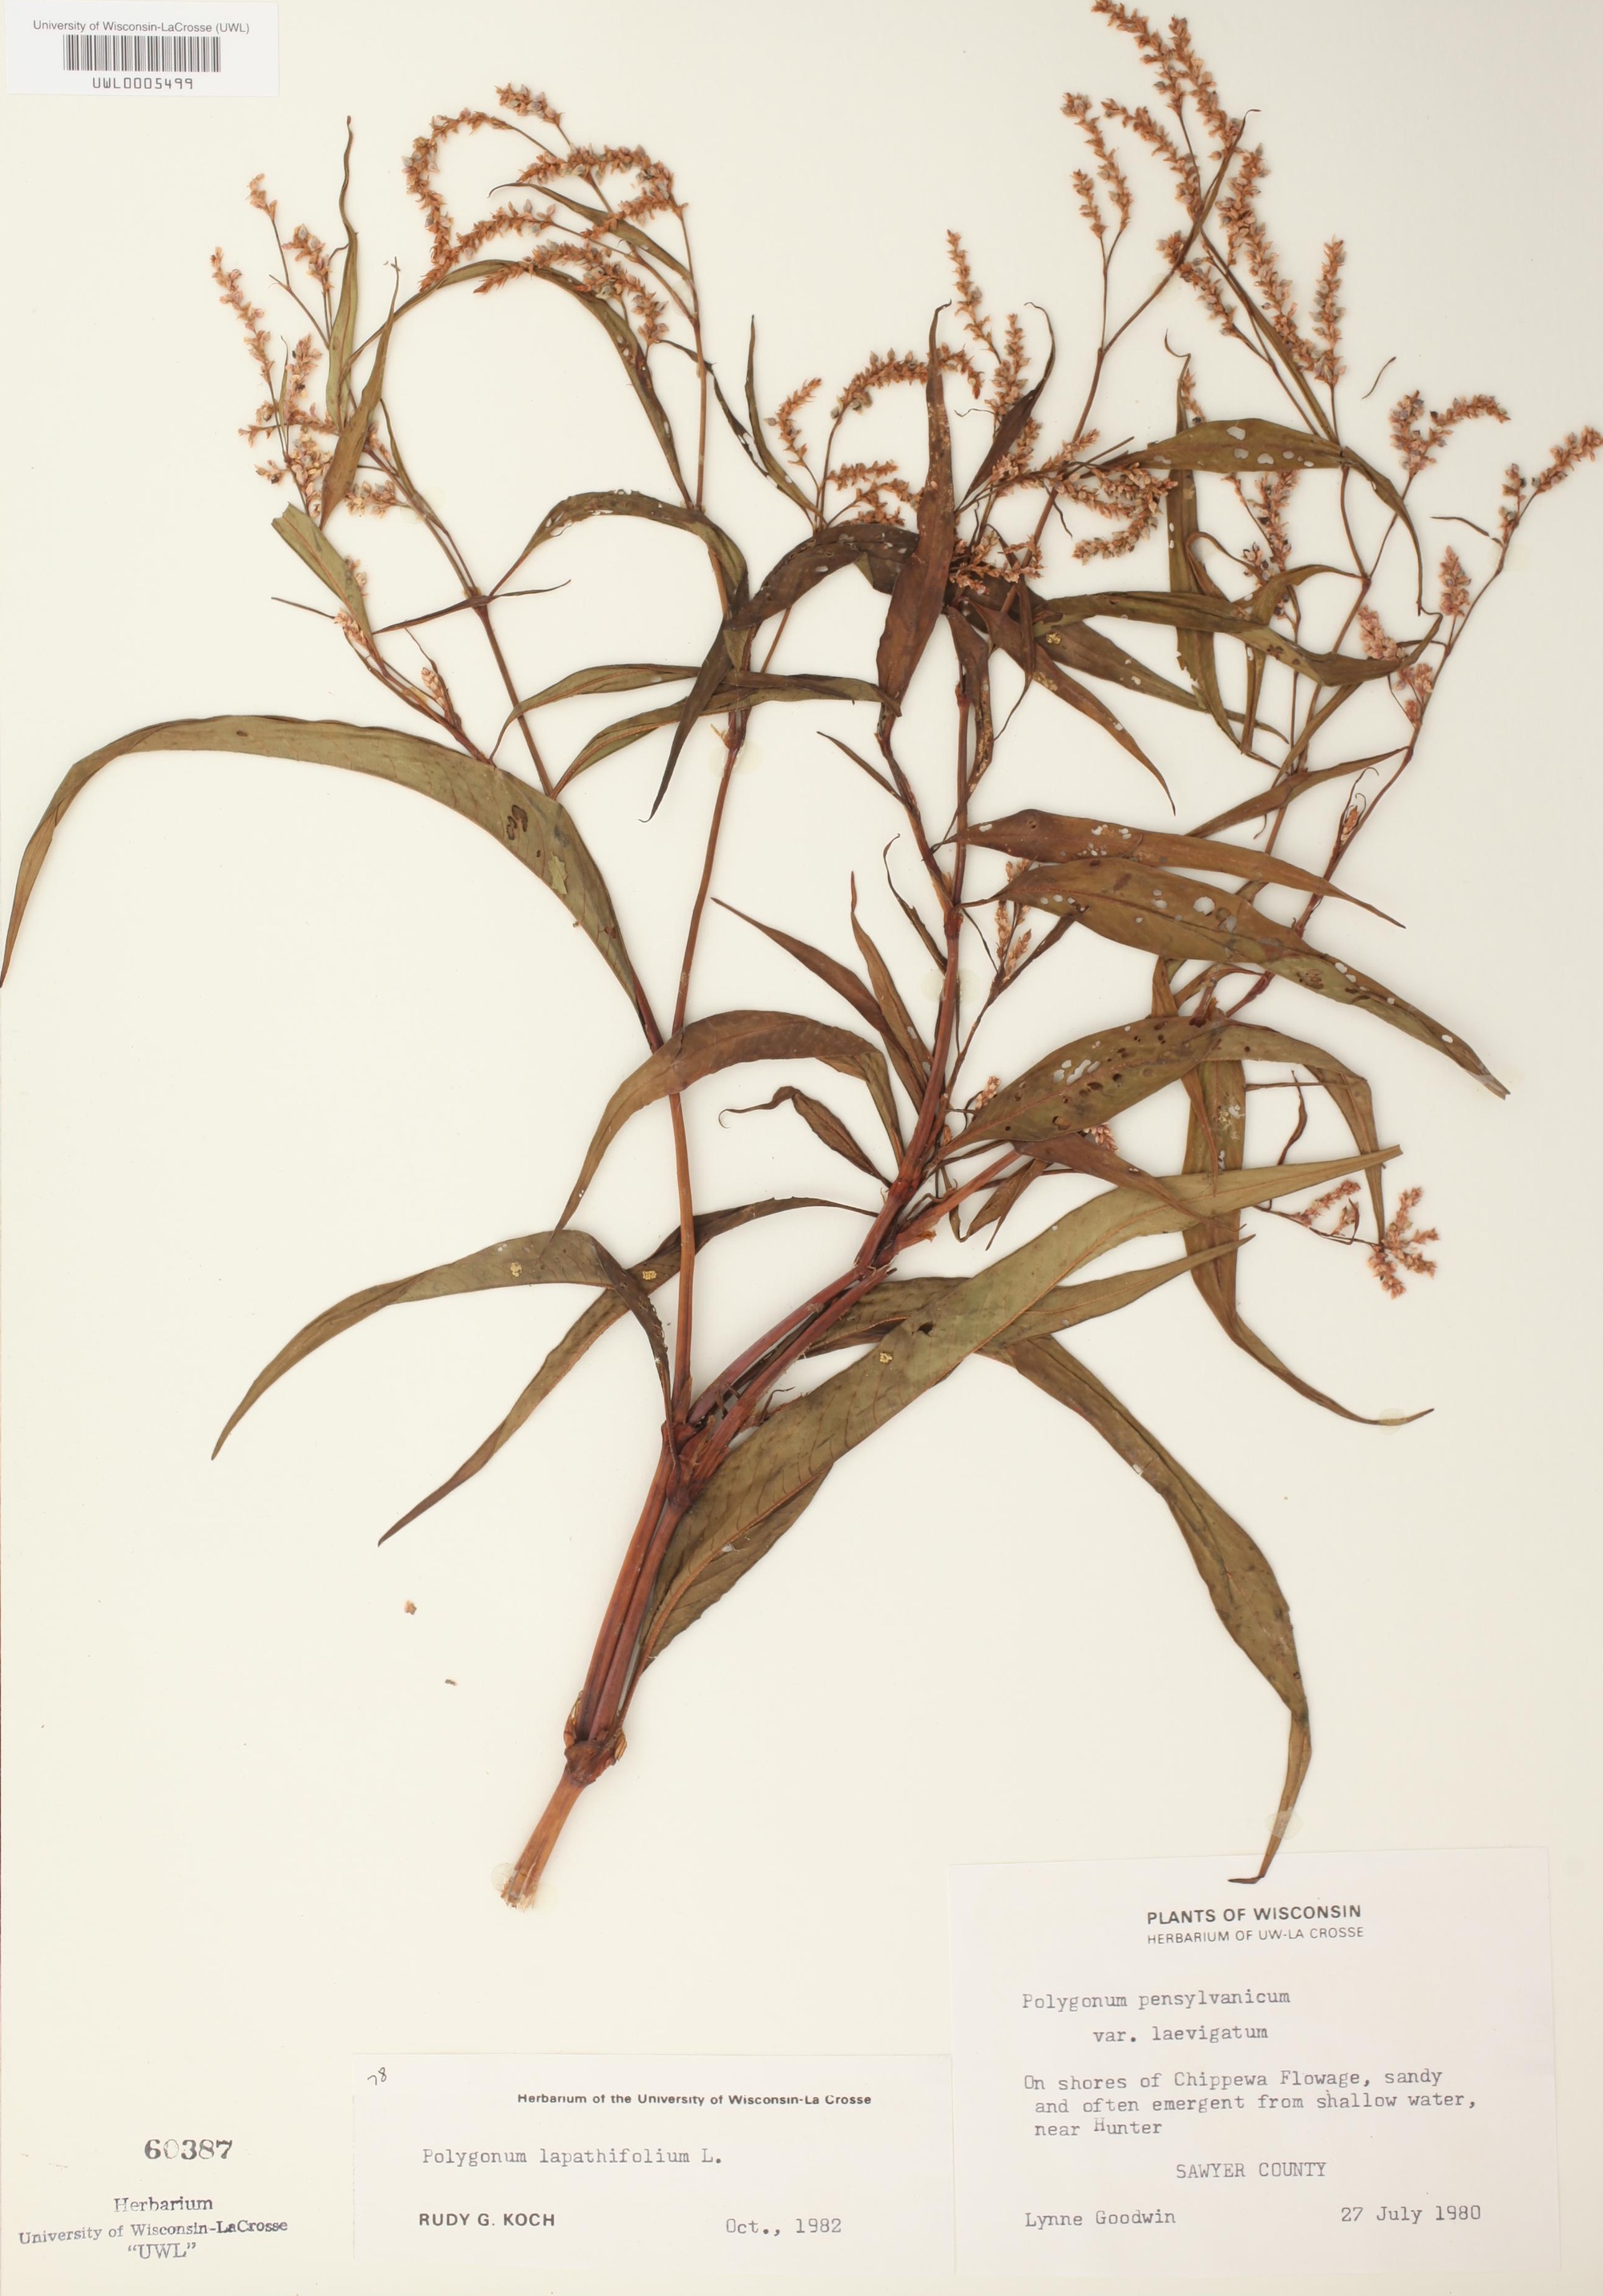 Nodding Smartweed specimen collected on shore of Chippewa Flowage near Hunter in Sawyer County on July 27, 1980.